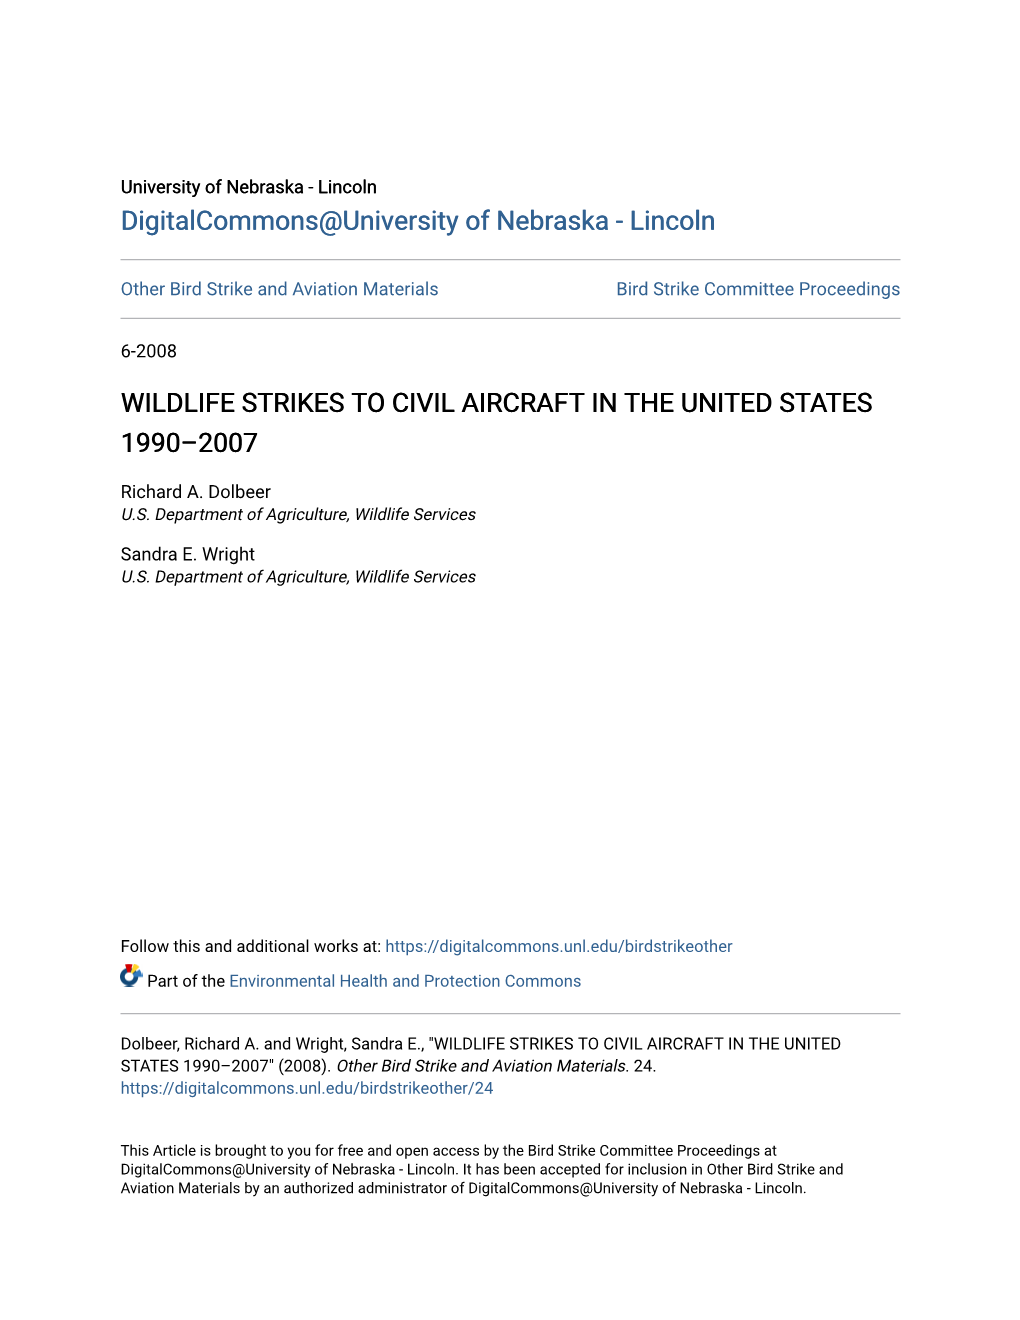 Wildlife Strikes to Civil Aircraft in the United States 1990–2007